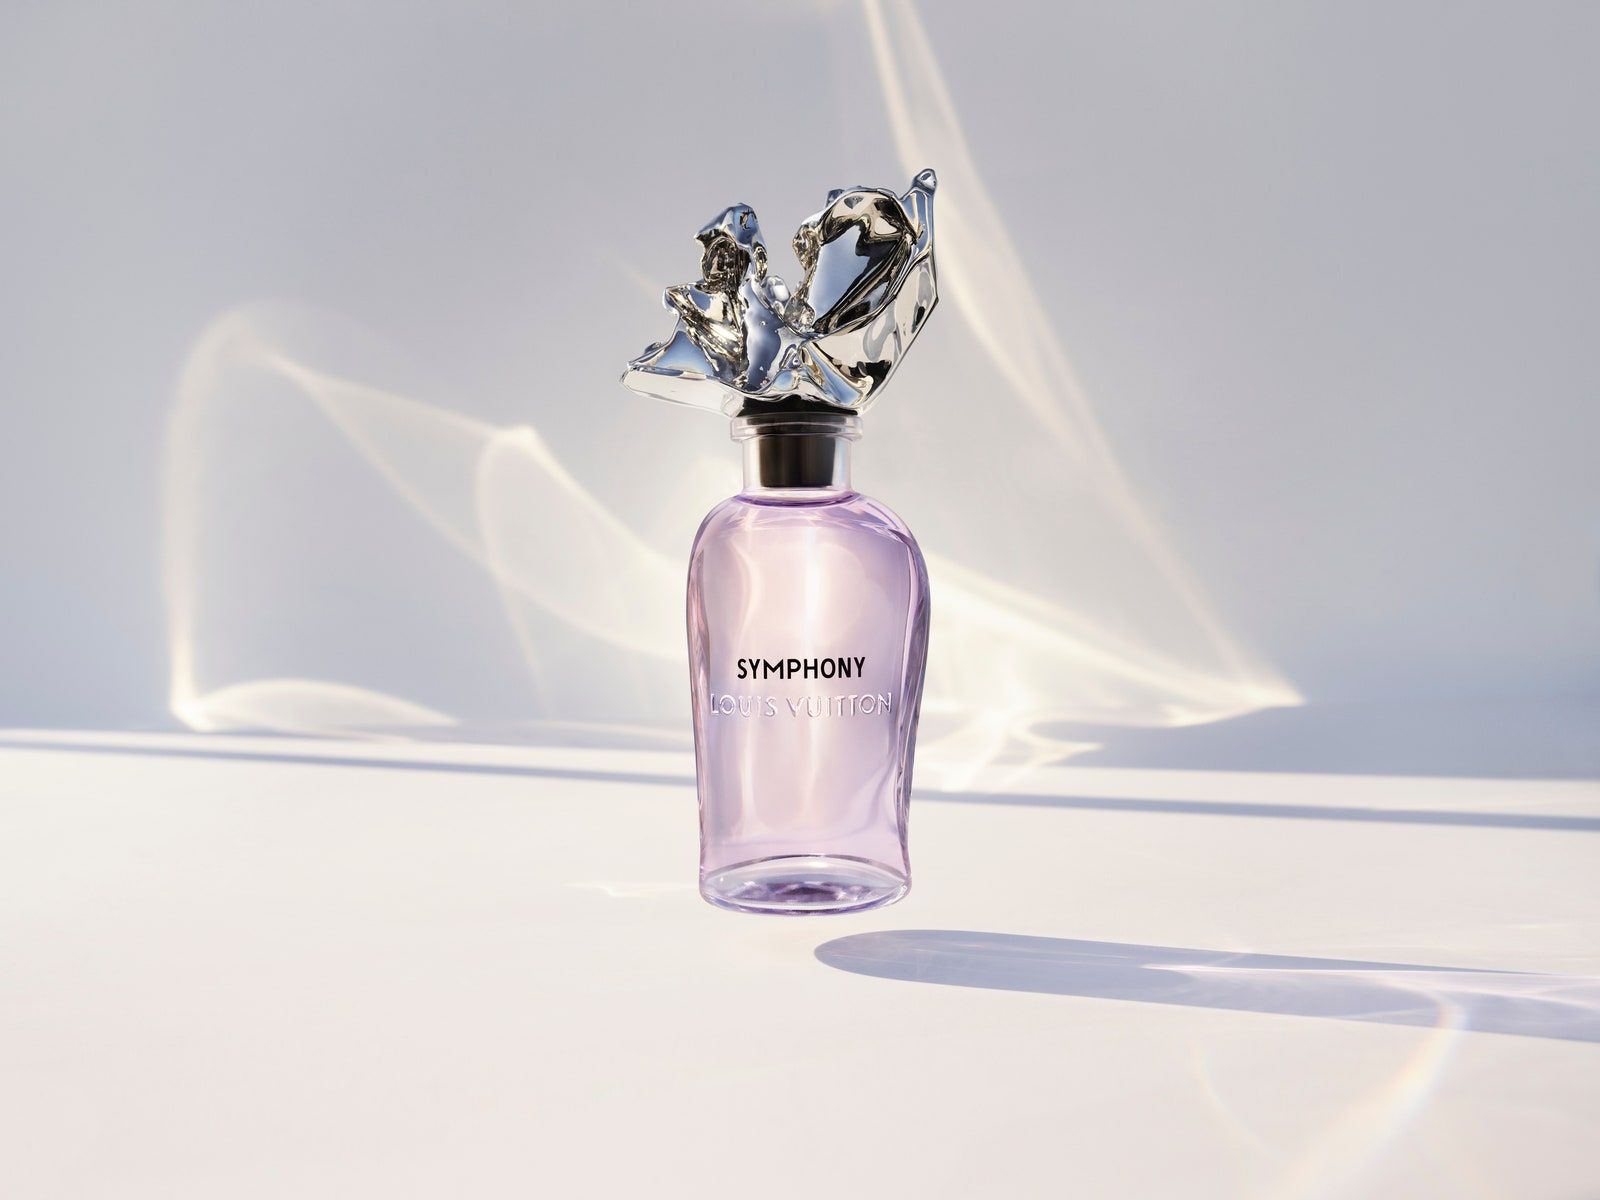 Symphony Louis Vuitton perfume - a fragrance for women and men 2021